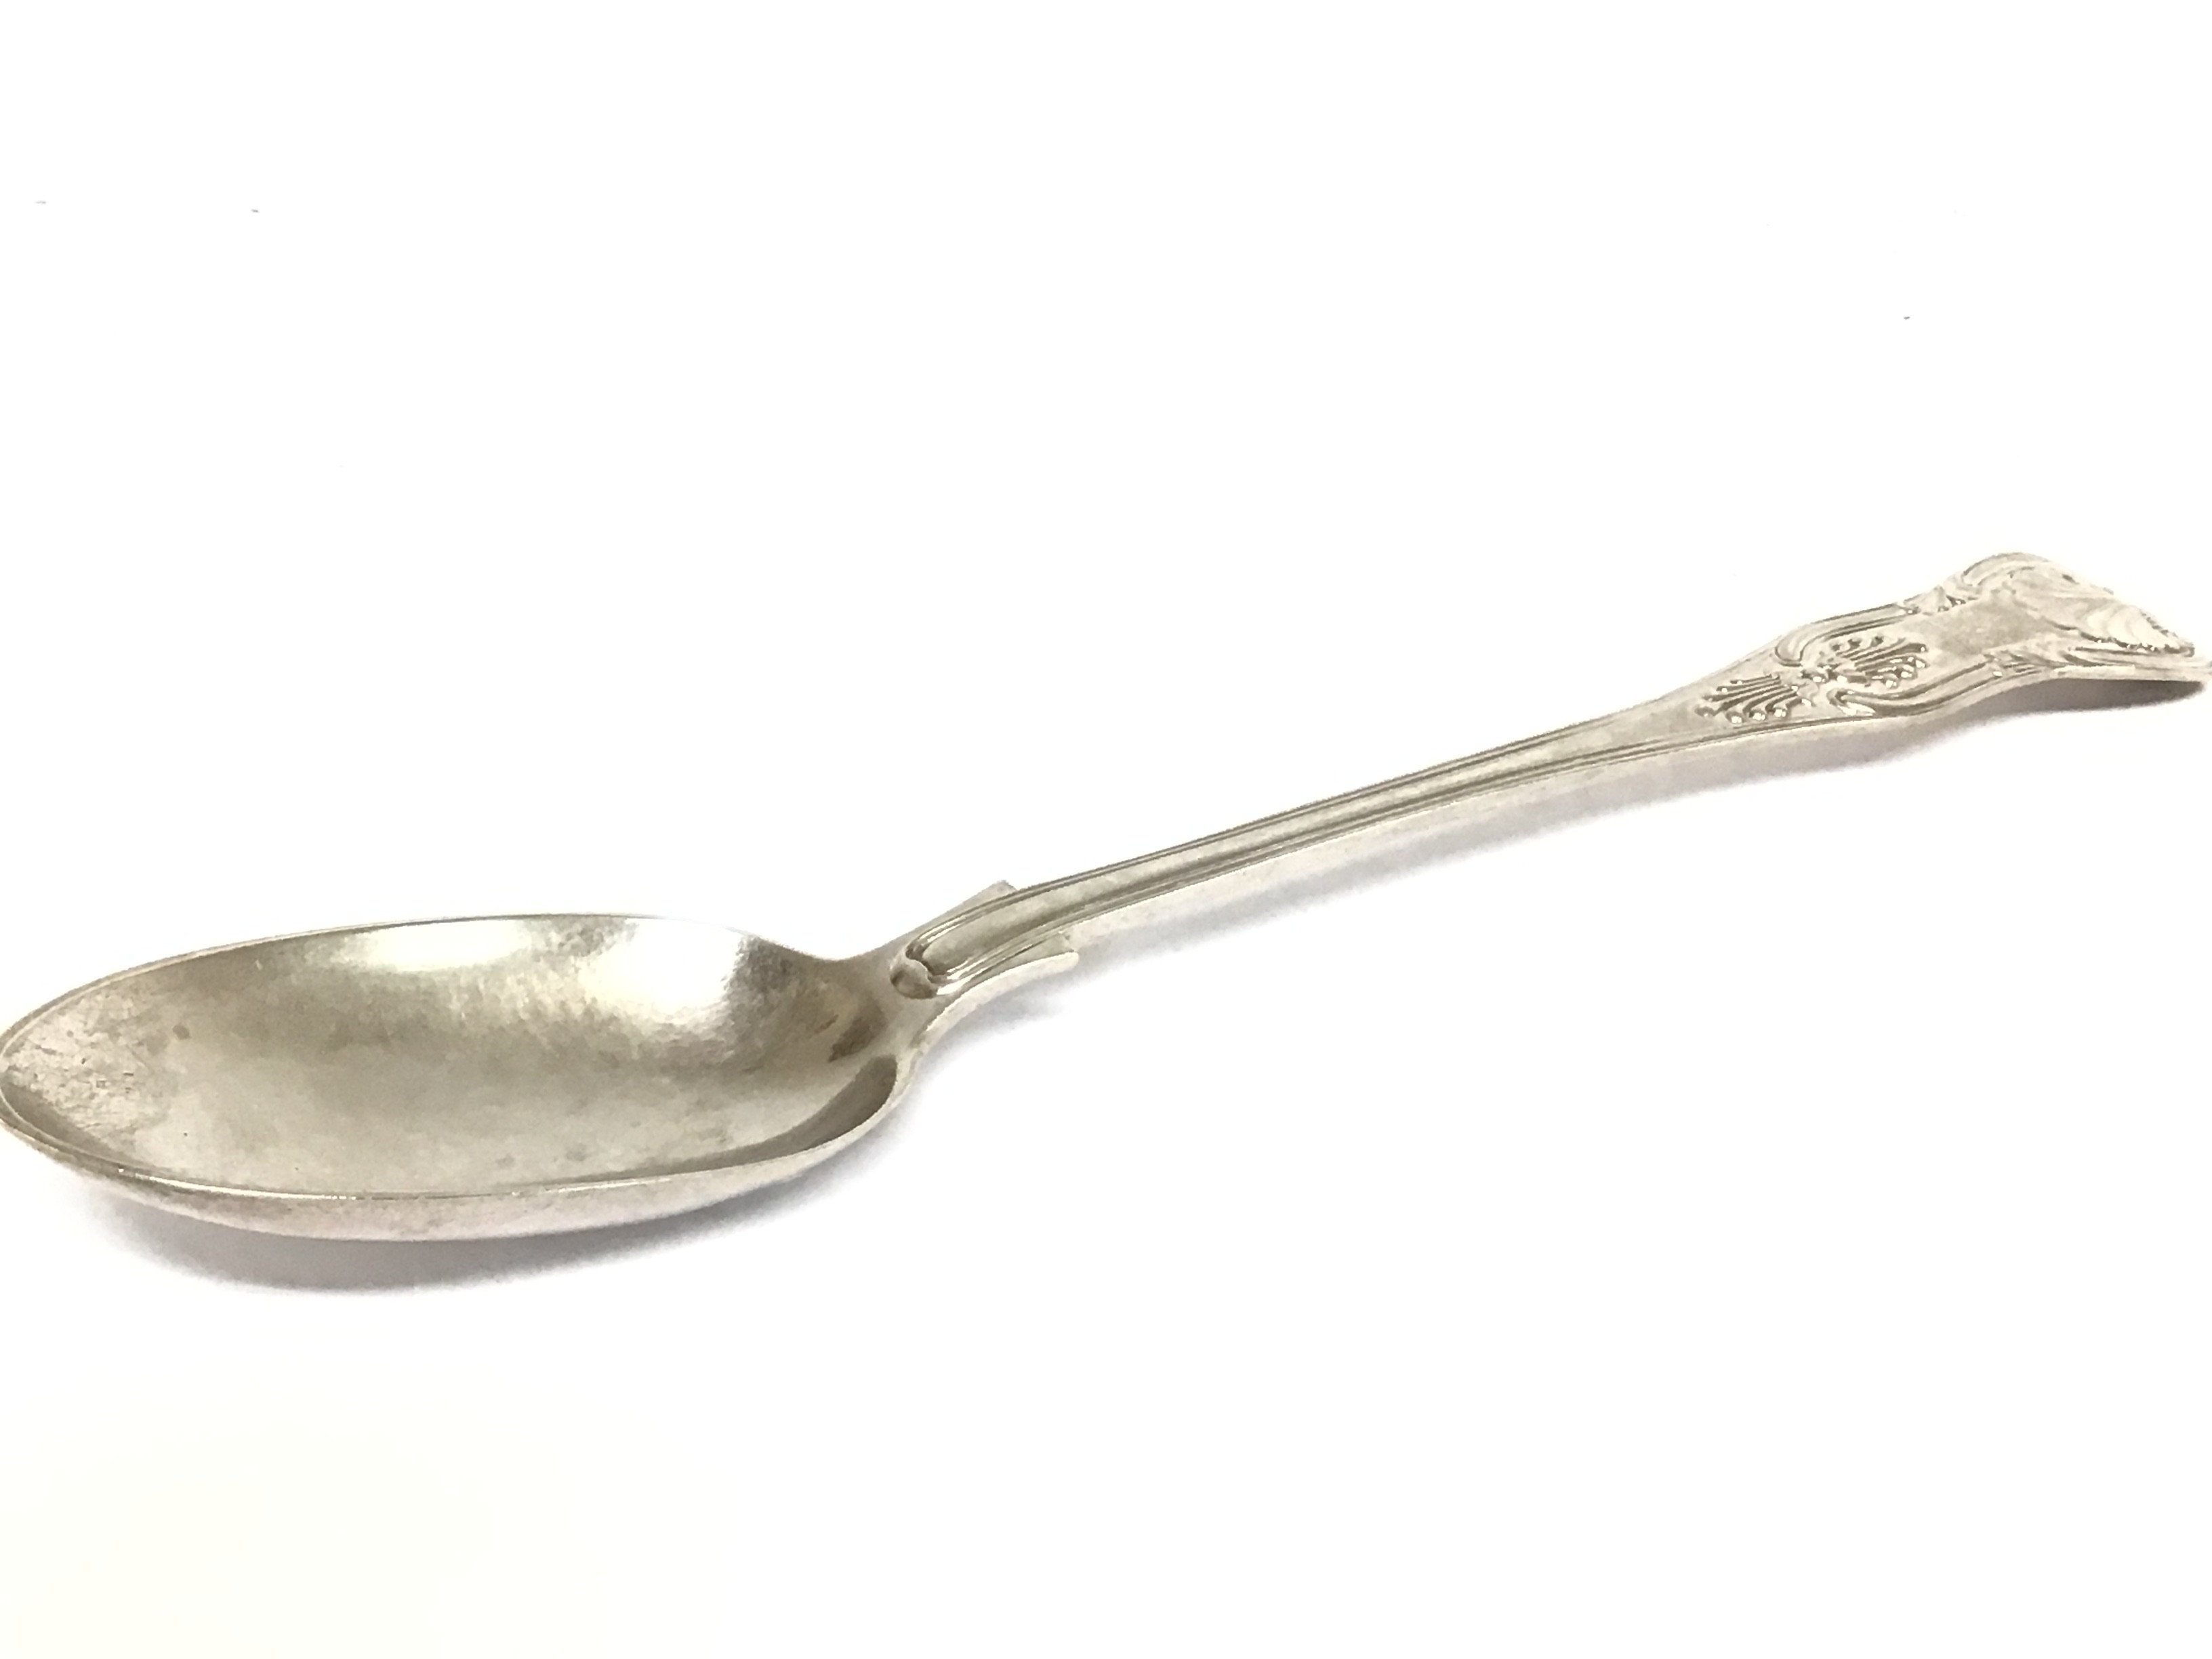 A large serving spoon (London 1895) approximately